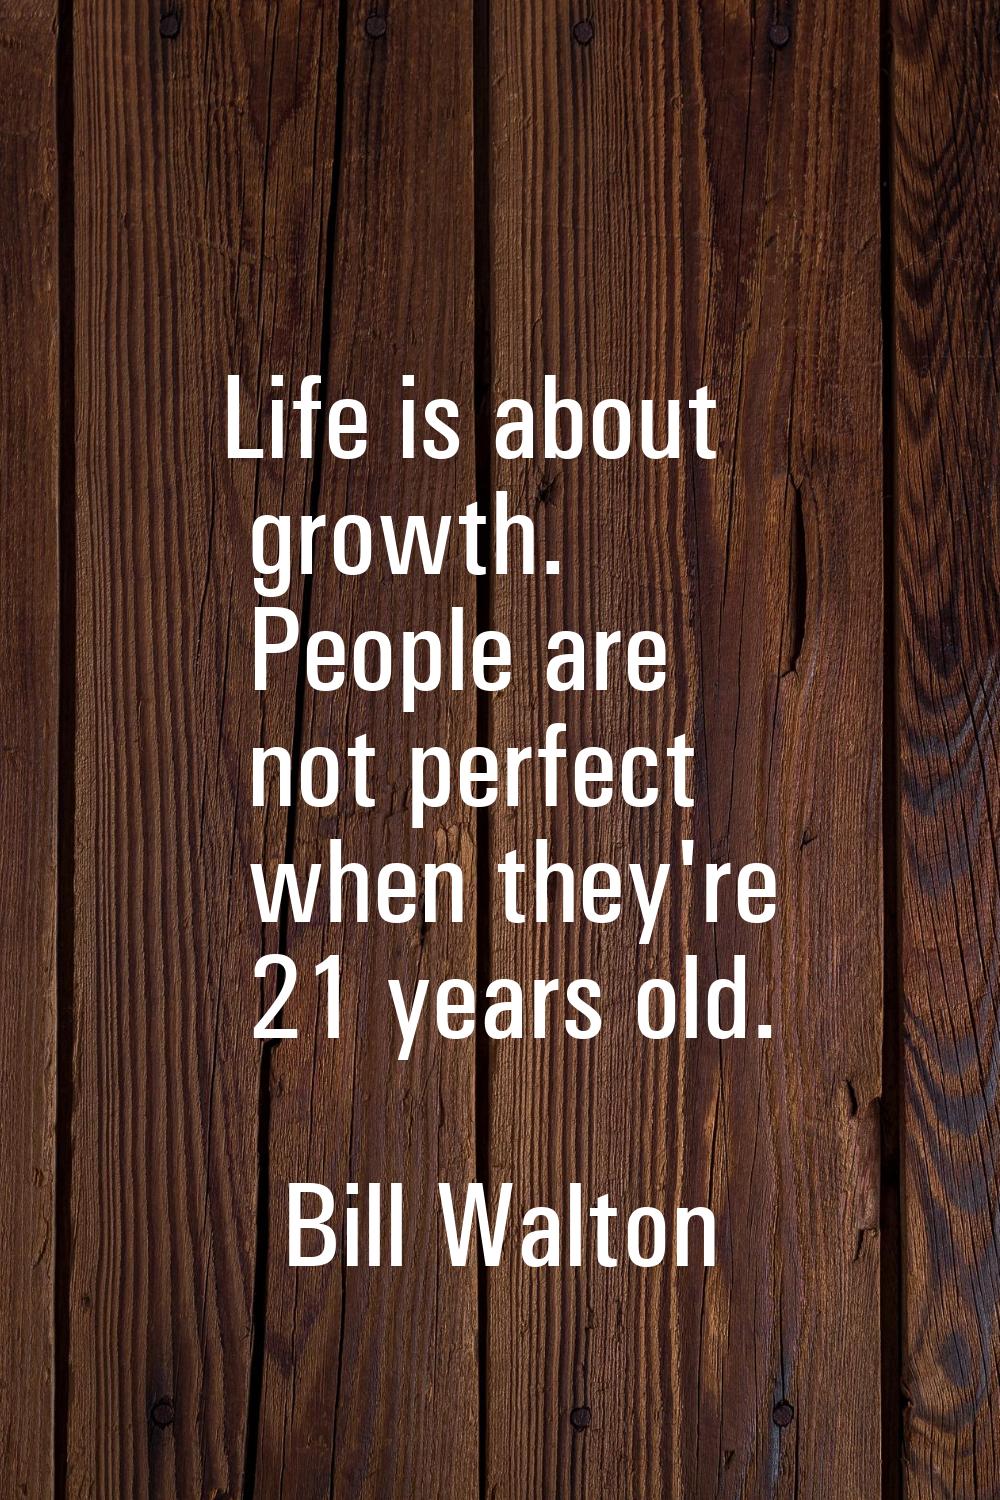 Life is about growth. People are not perfect when they're 21 years old.